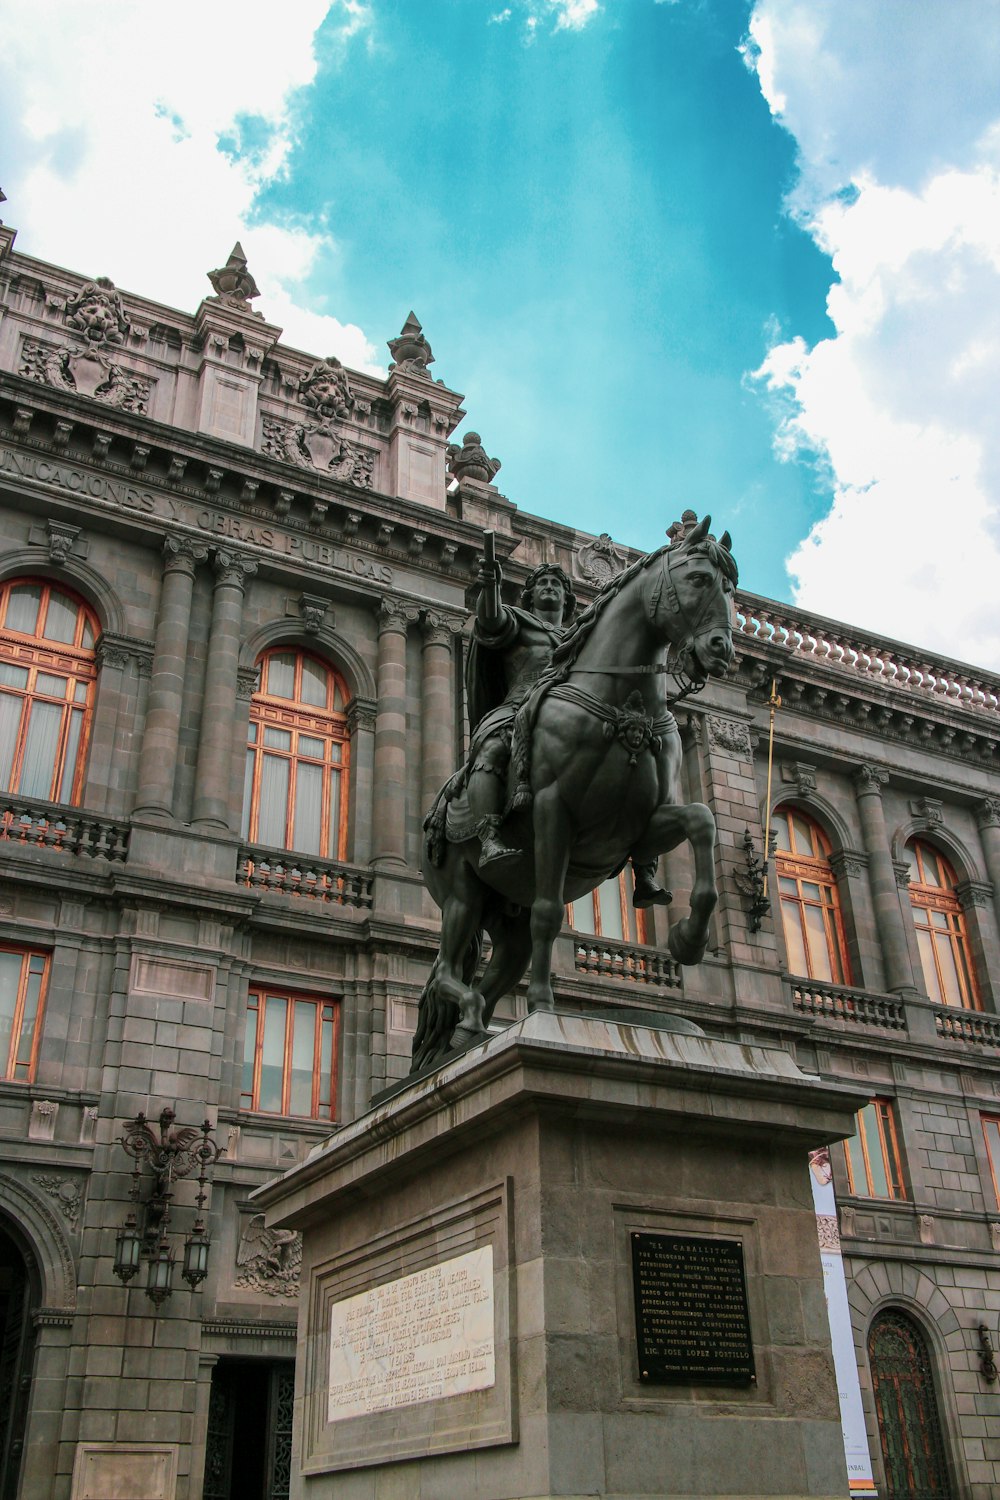 a statue of a person on a horse in front of a building